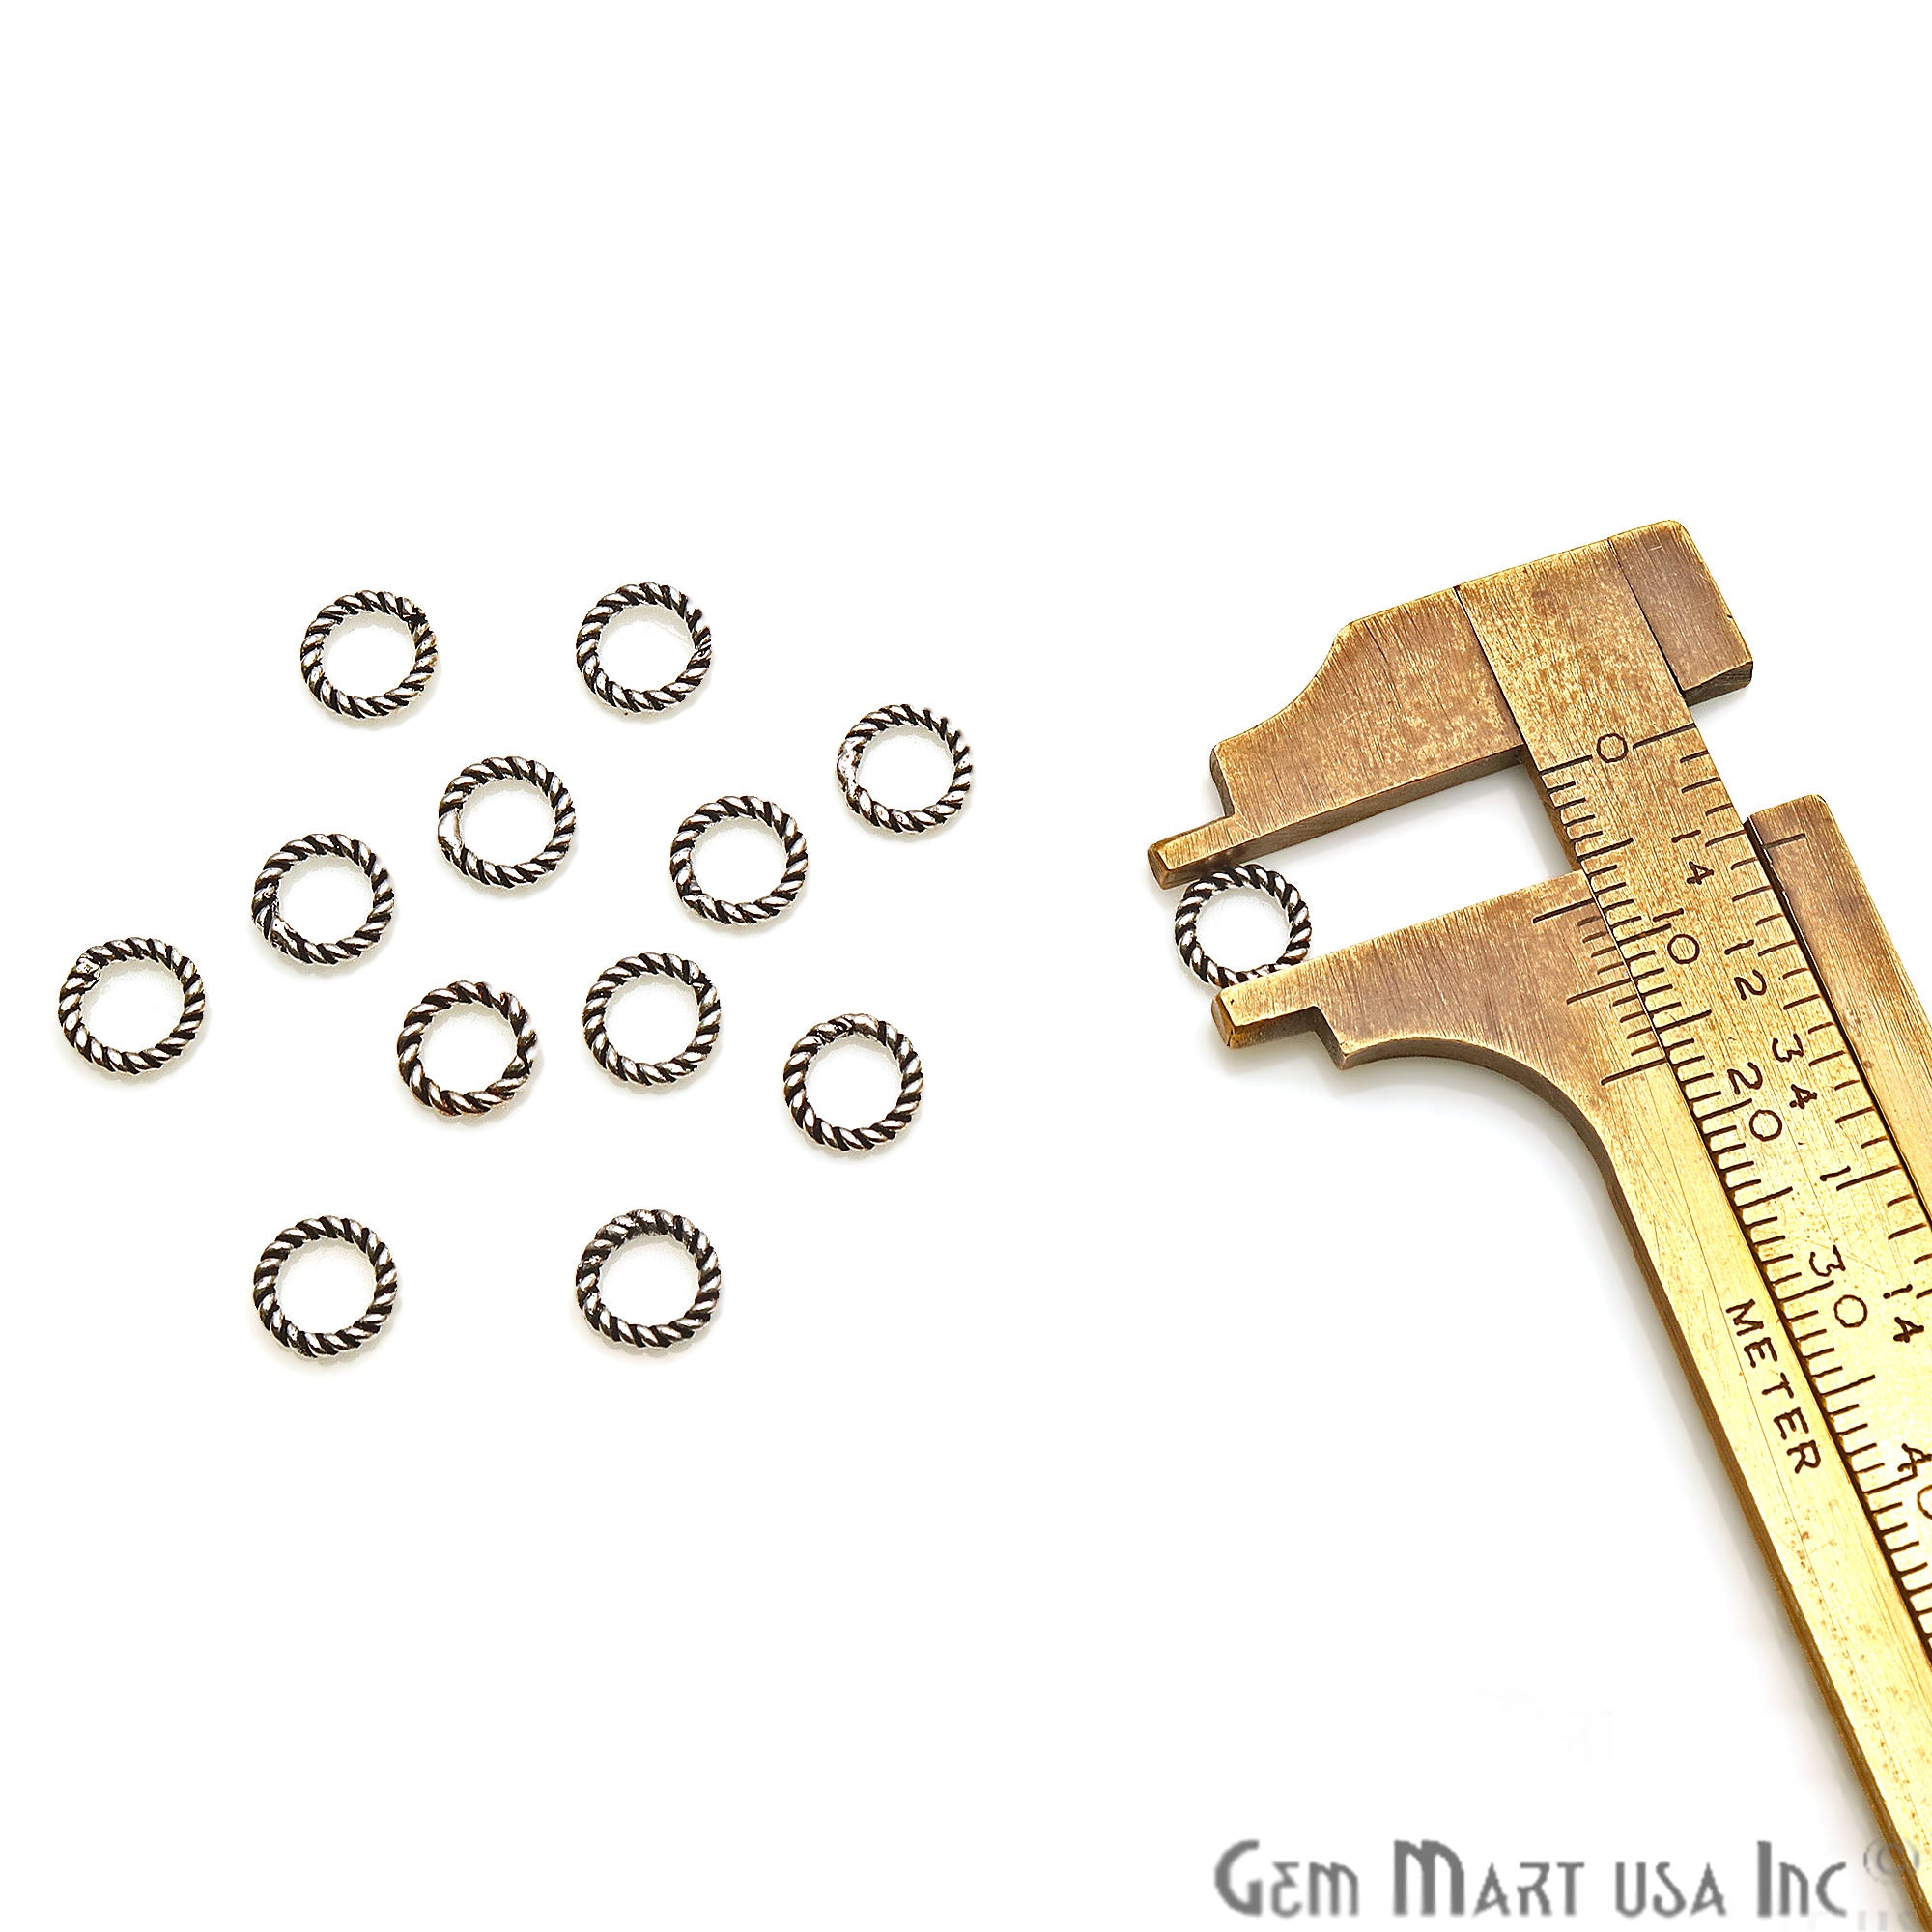 10pc Lot Round Oxidized Finding, Filigree Findings, Findings, Jewelry Findings - GemMartUSA